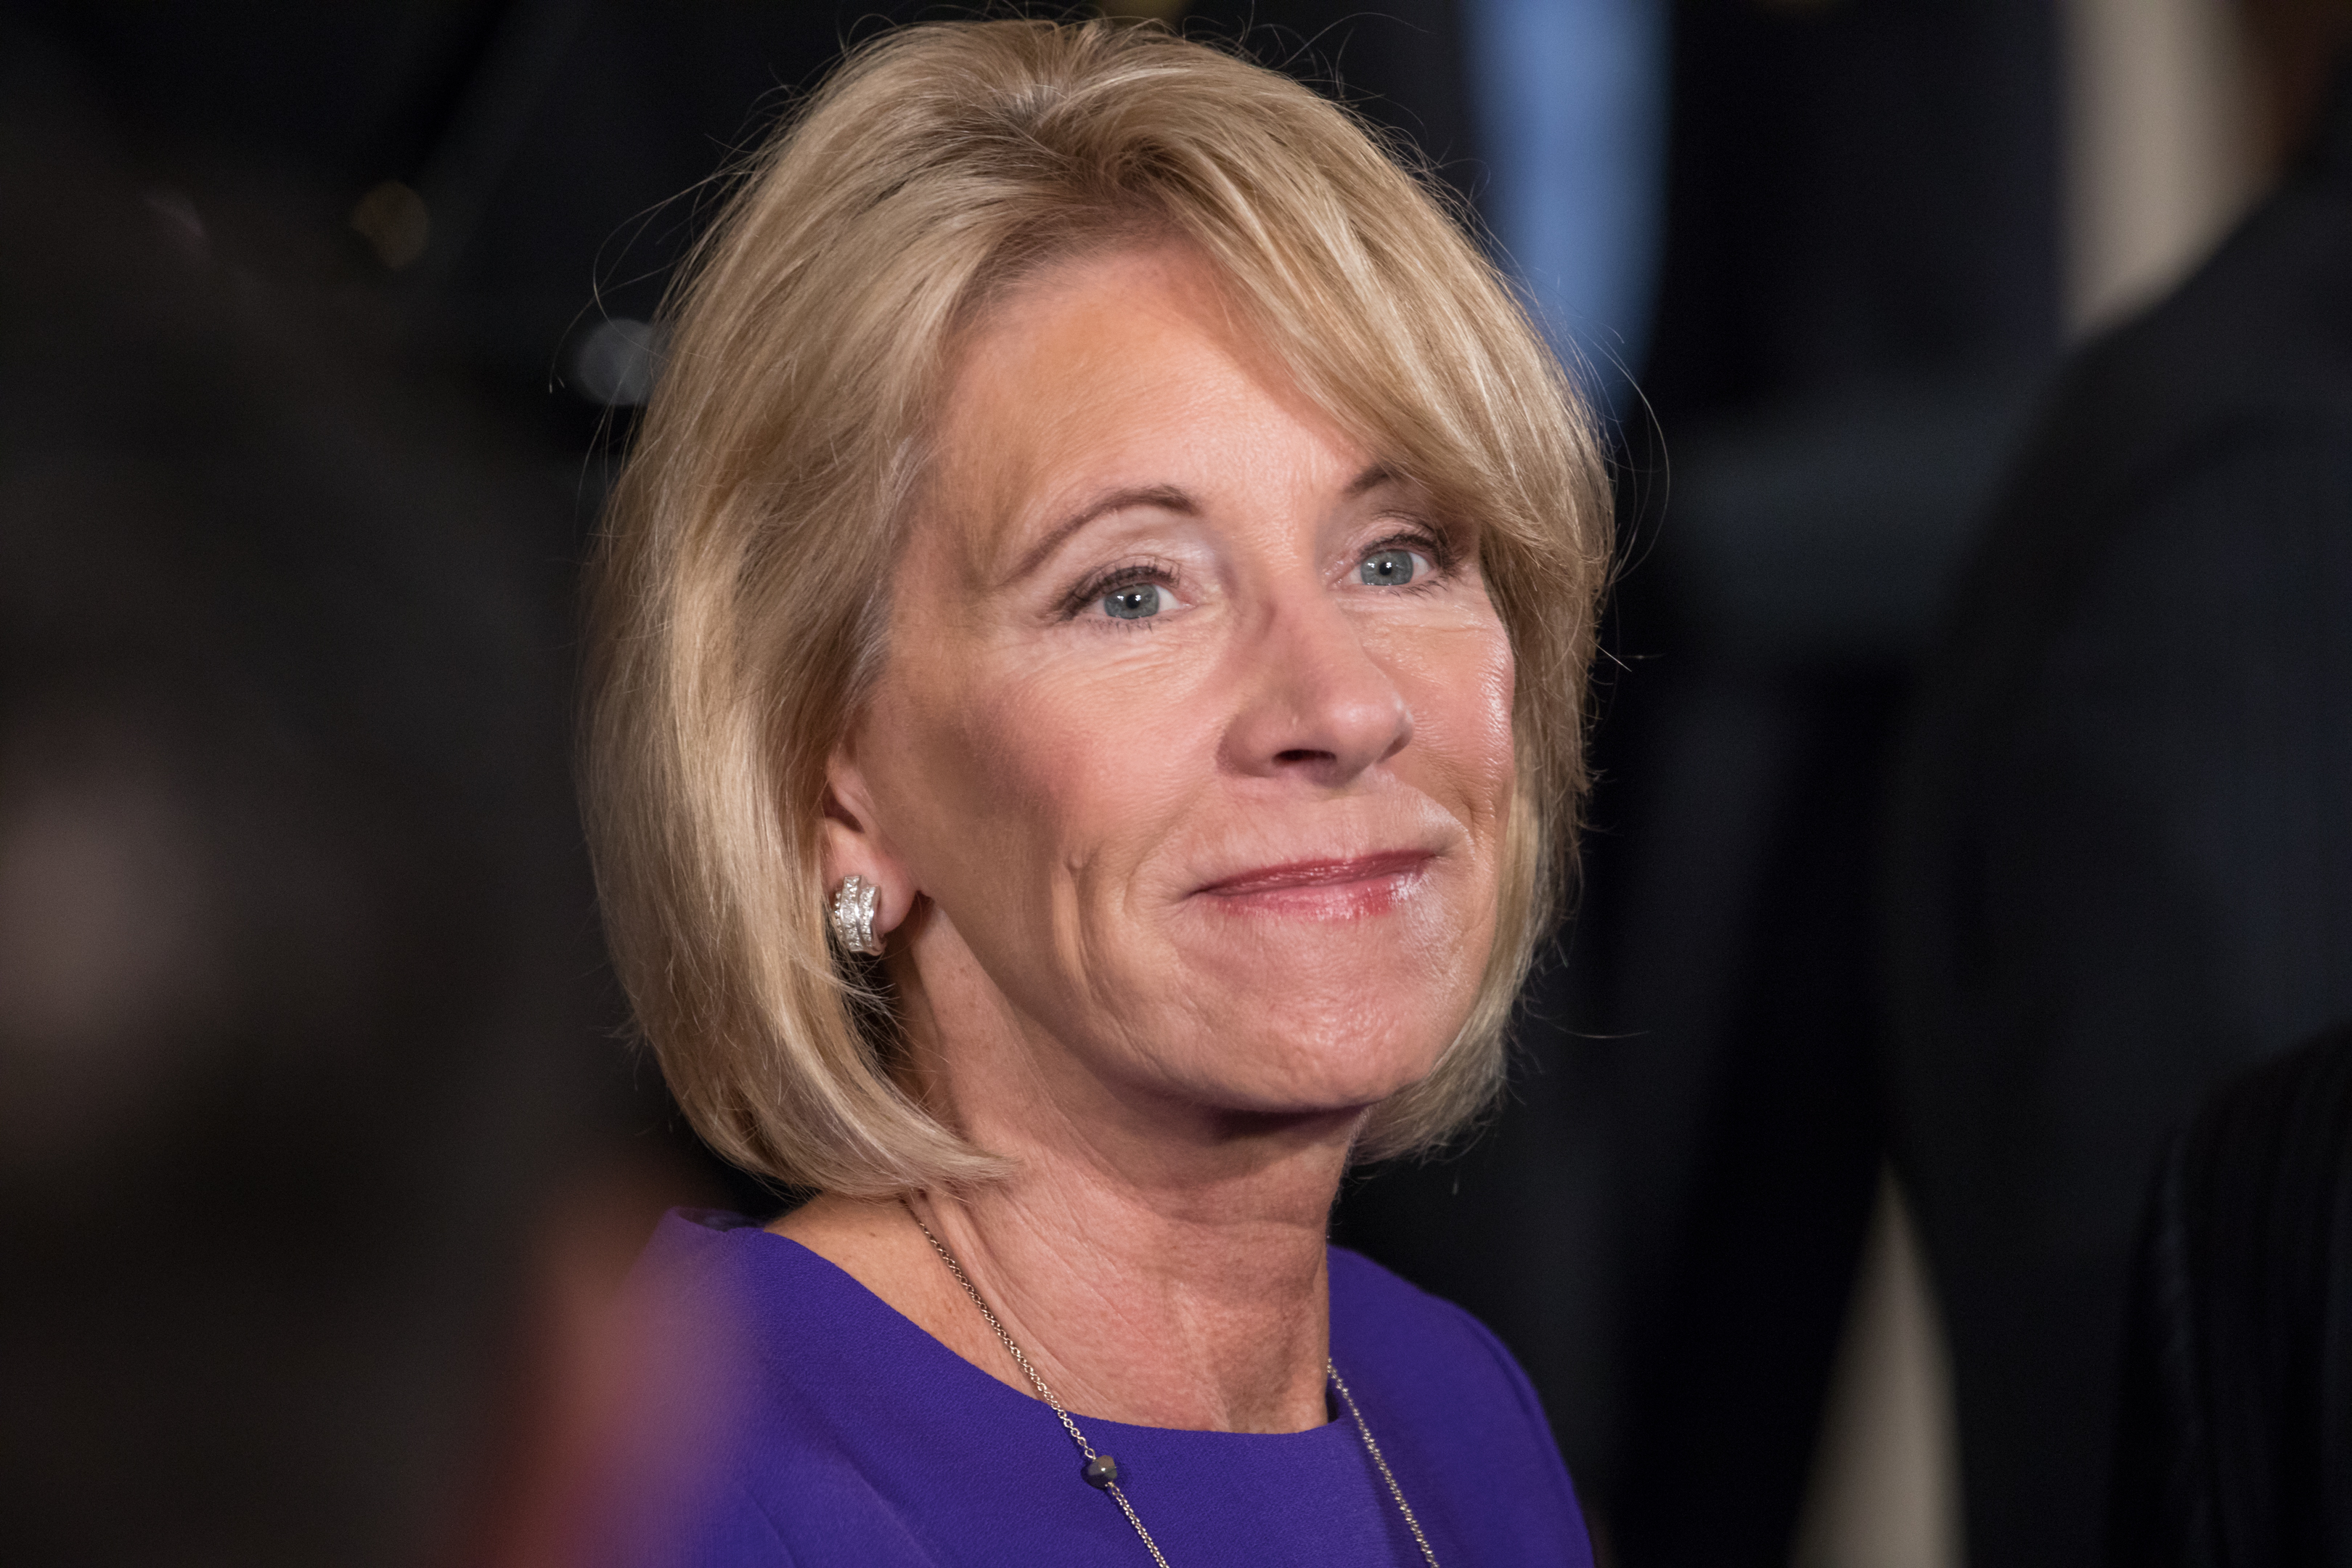 Betsy DeVos, U.S. secretary of education, was in attendance at President Donald Trump's event on combatting drug demand and the opioid crisis, in the East Room of the White House, on Oct. 26th, 2017.  (Cheriss May—NurPhoto/Getty Images)